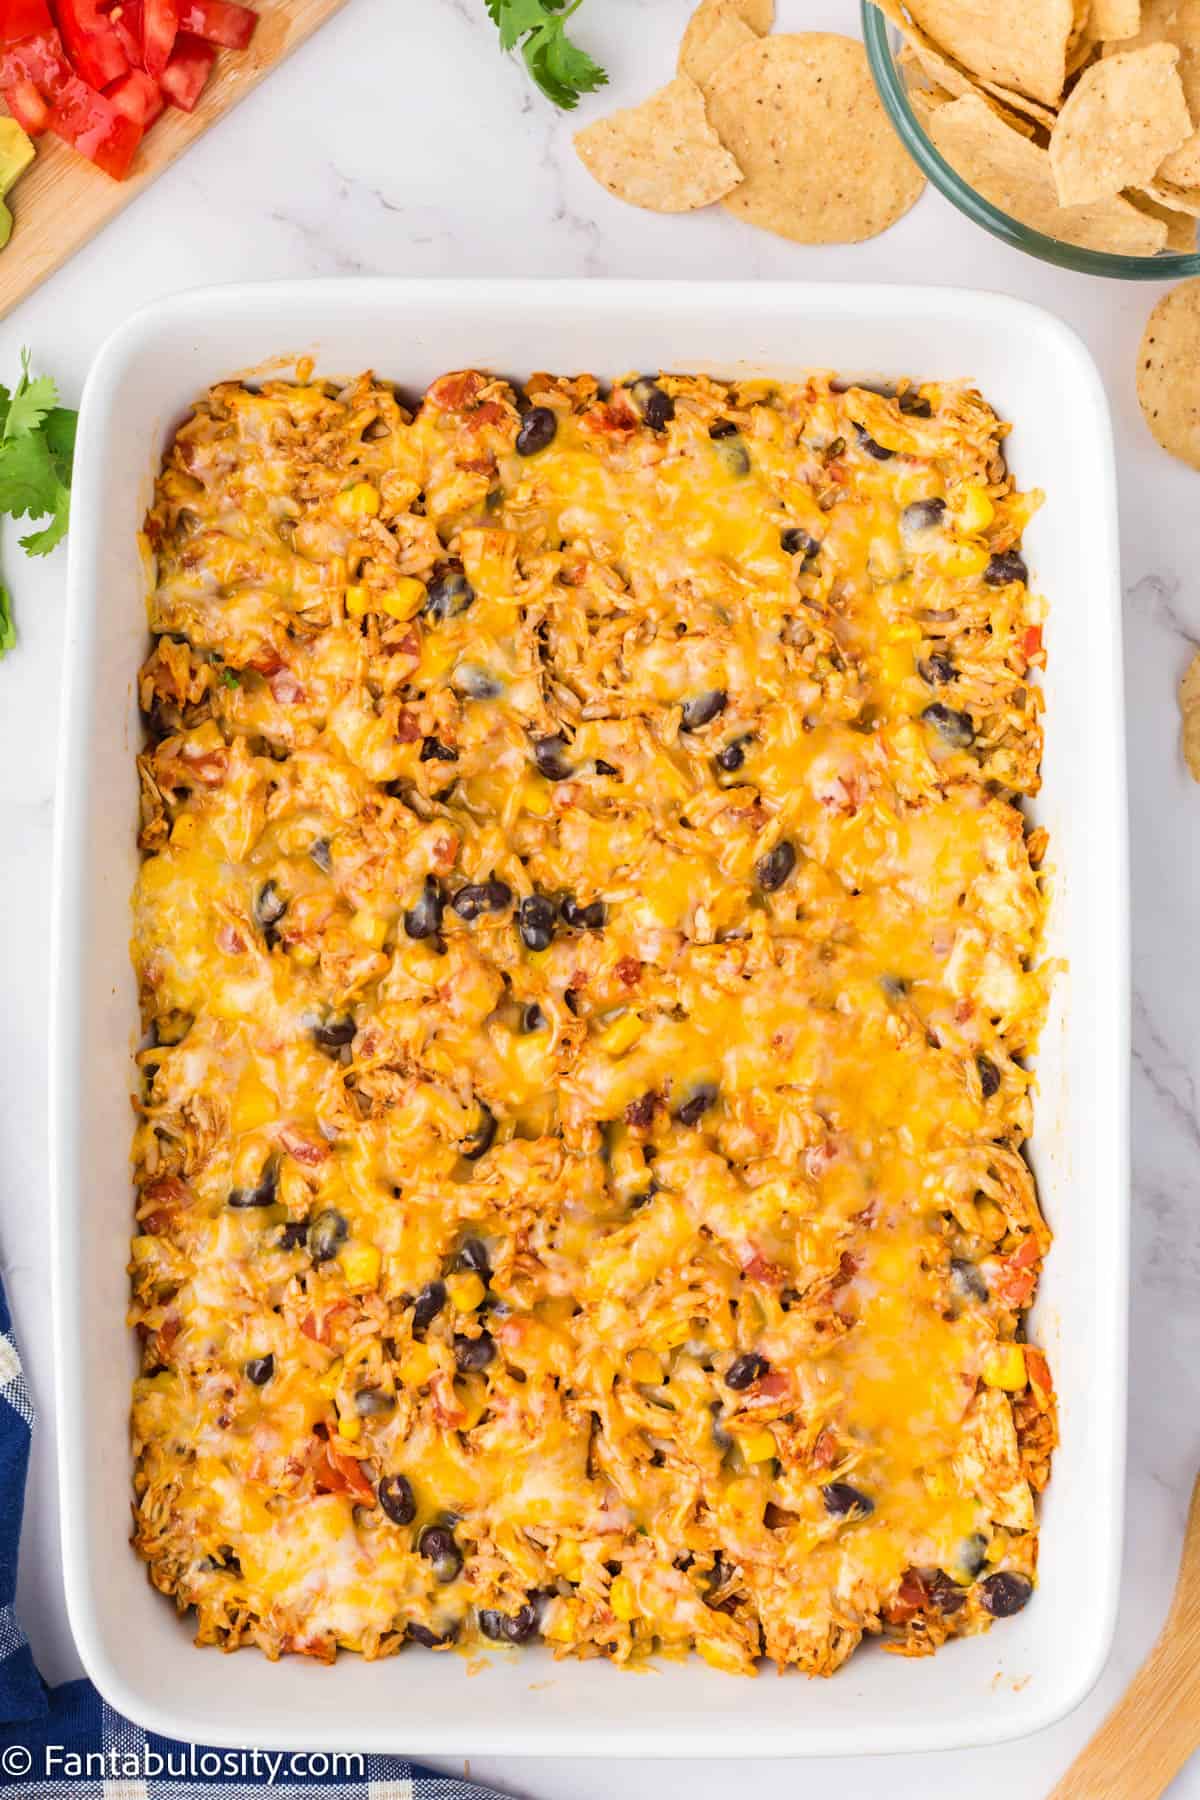 The baked casserole with the cheese on top looking melted.